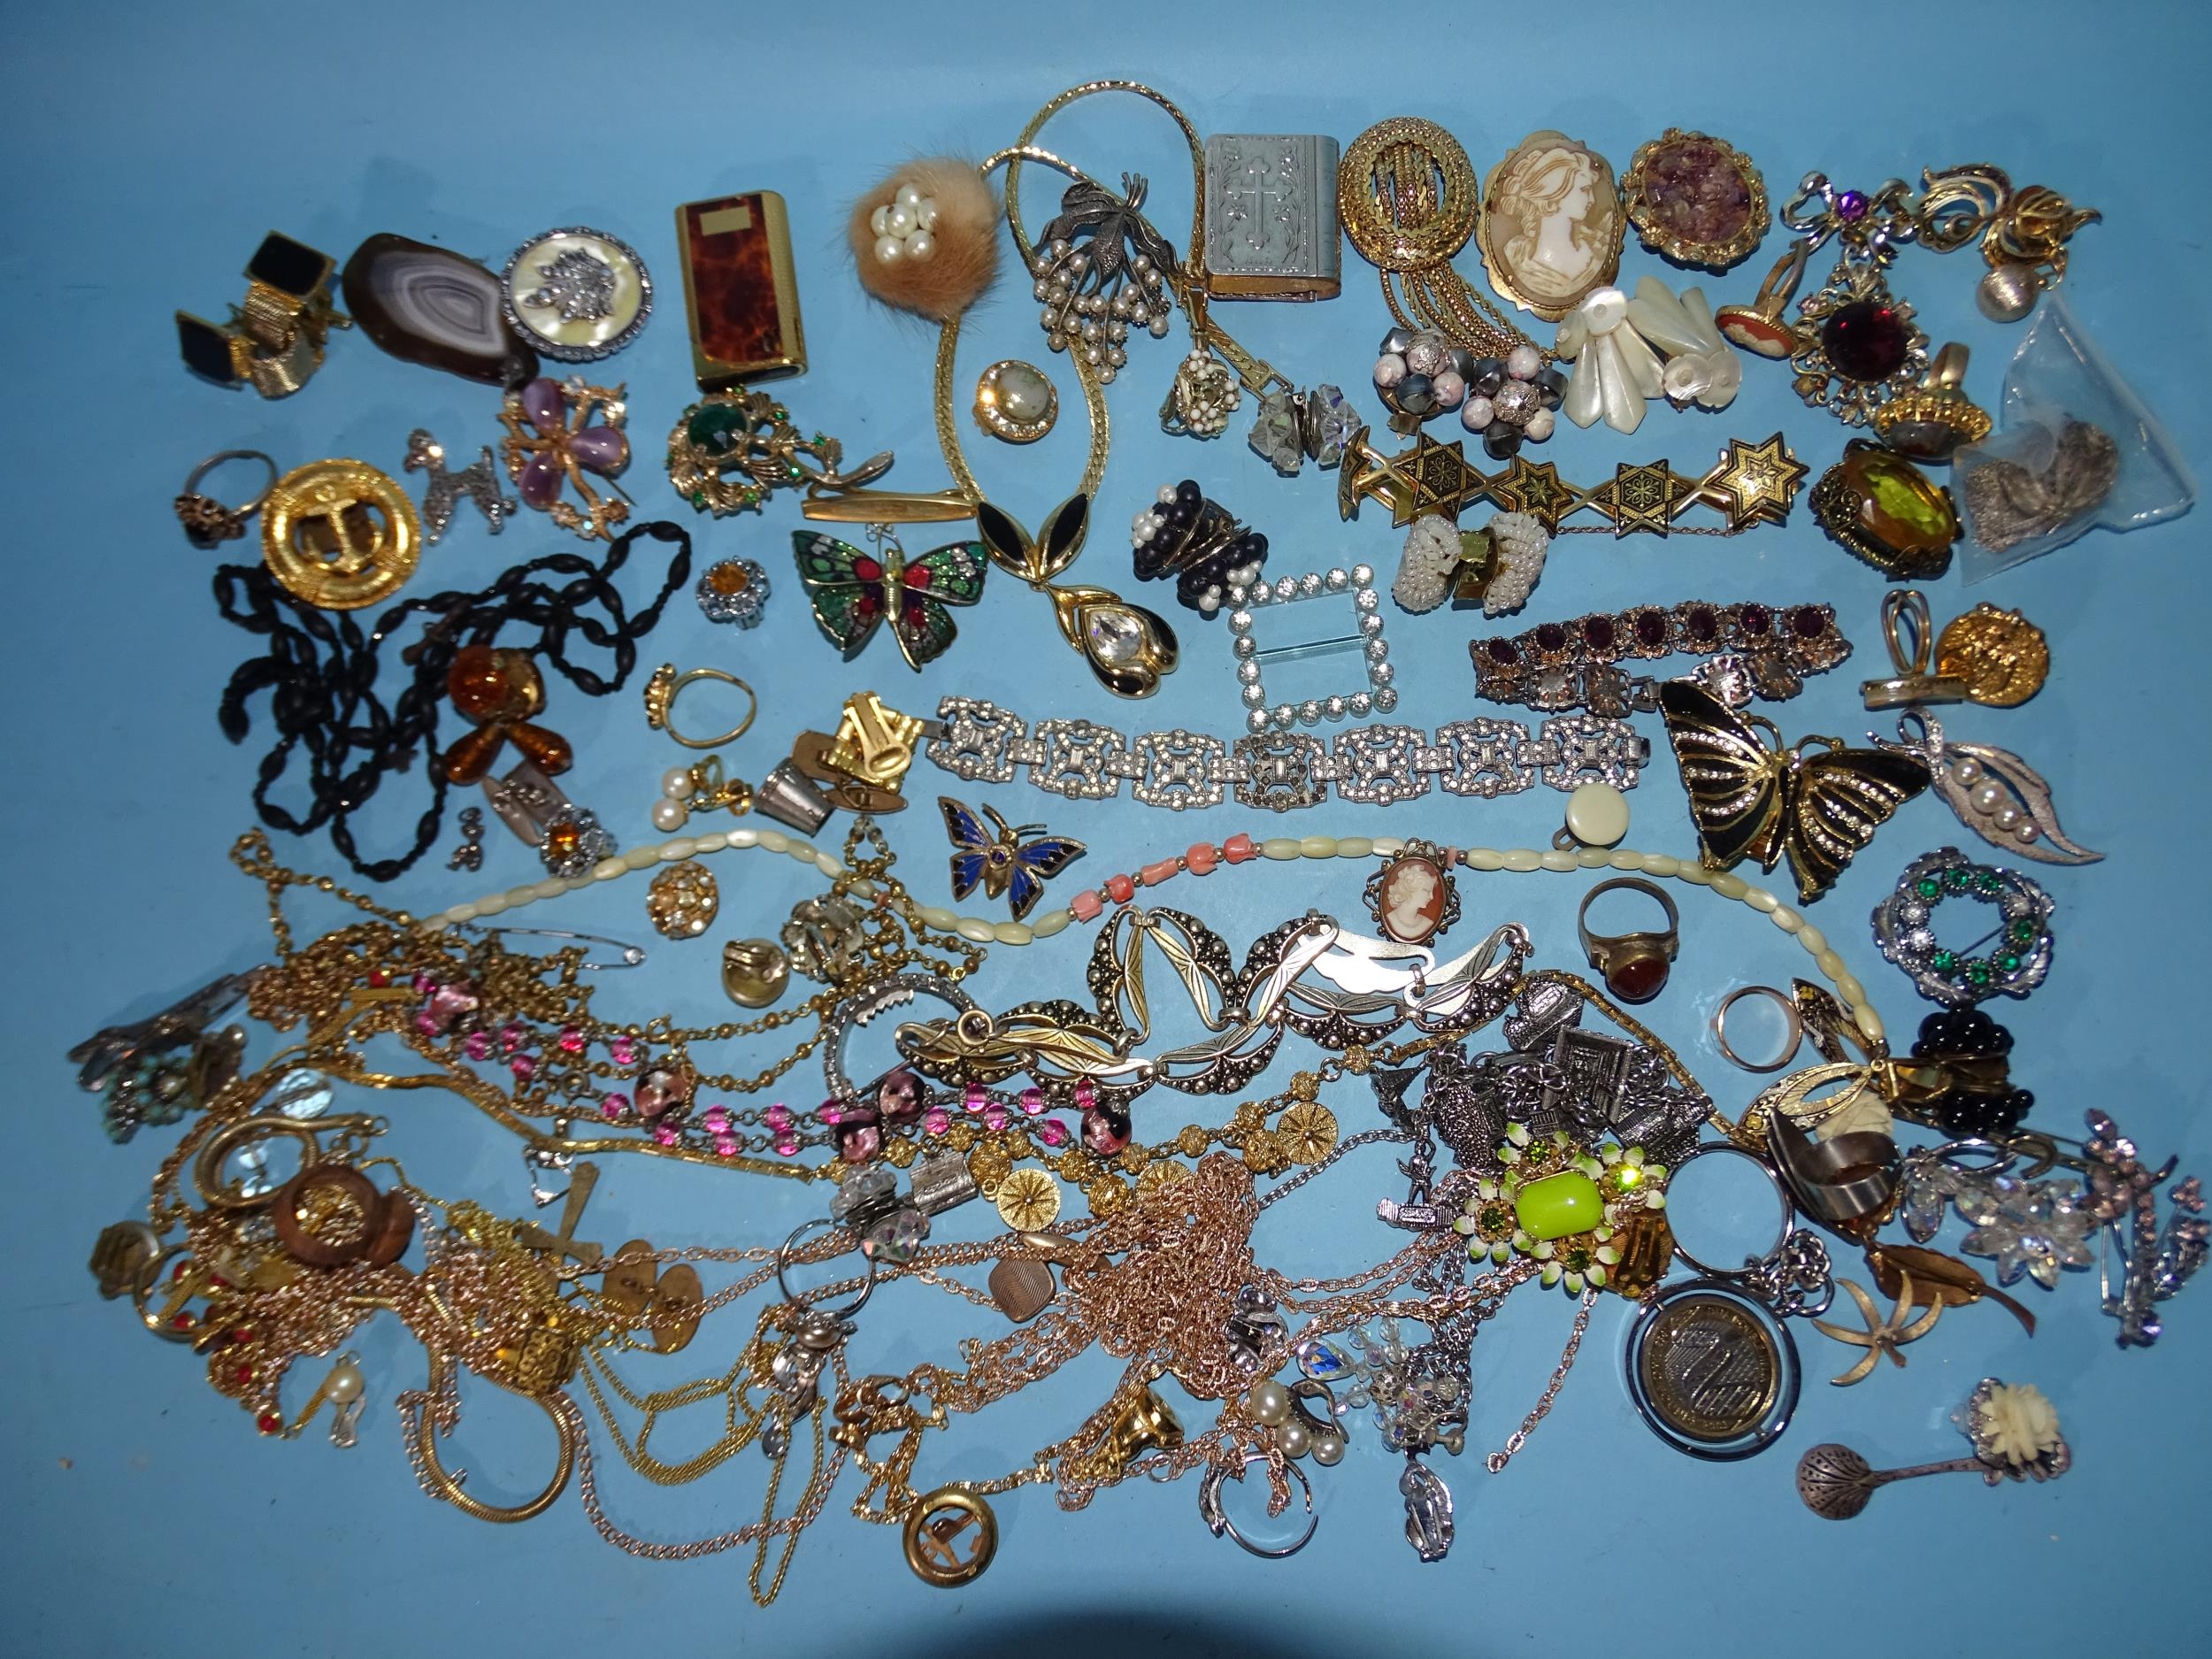 A quantity of costume jewellery, compacts, trinket boxes, etc. - Image 2 of 2